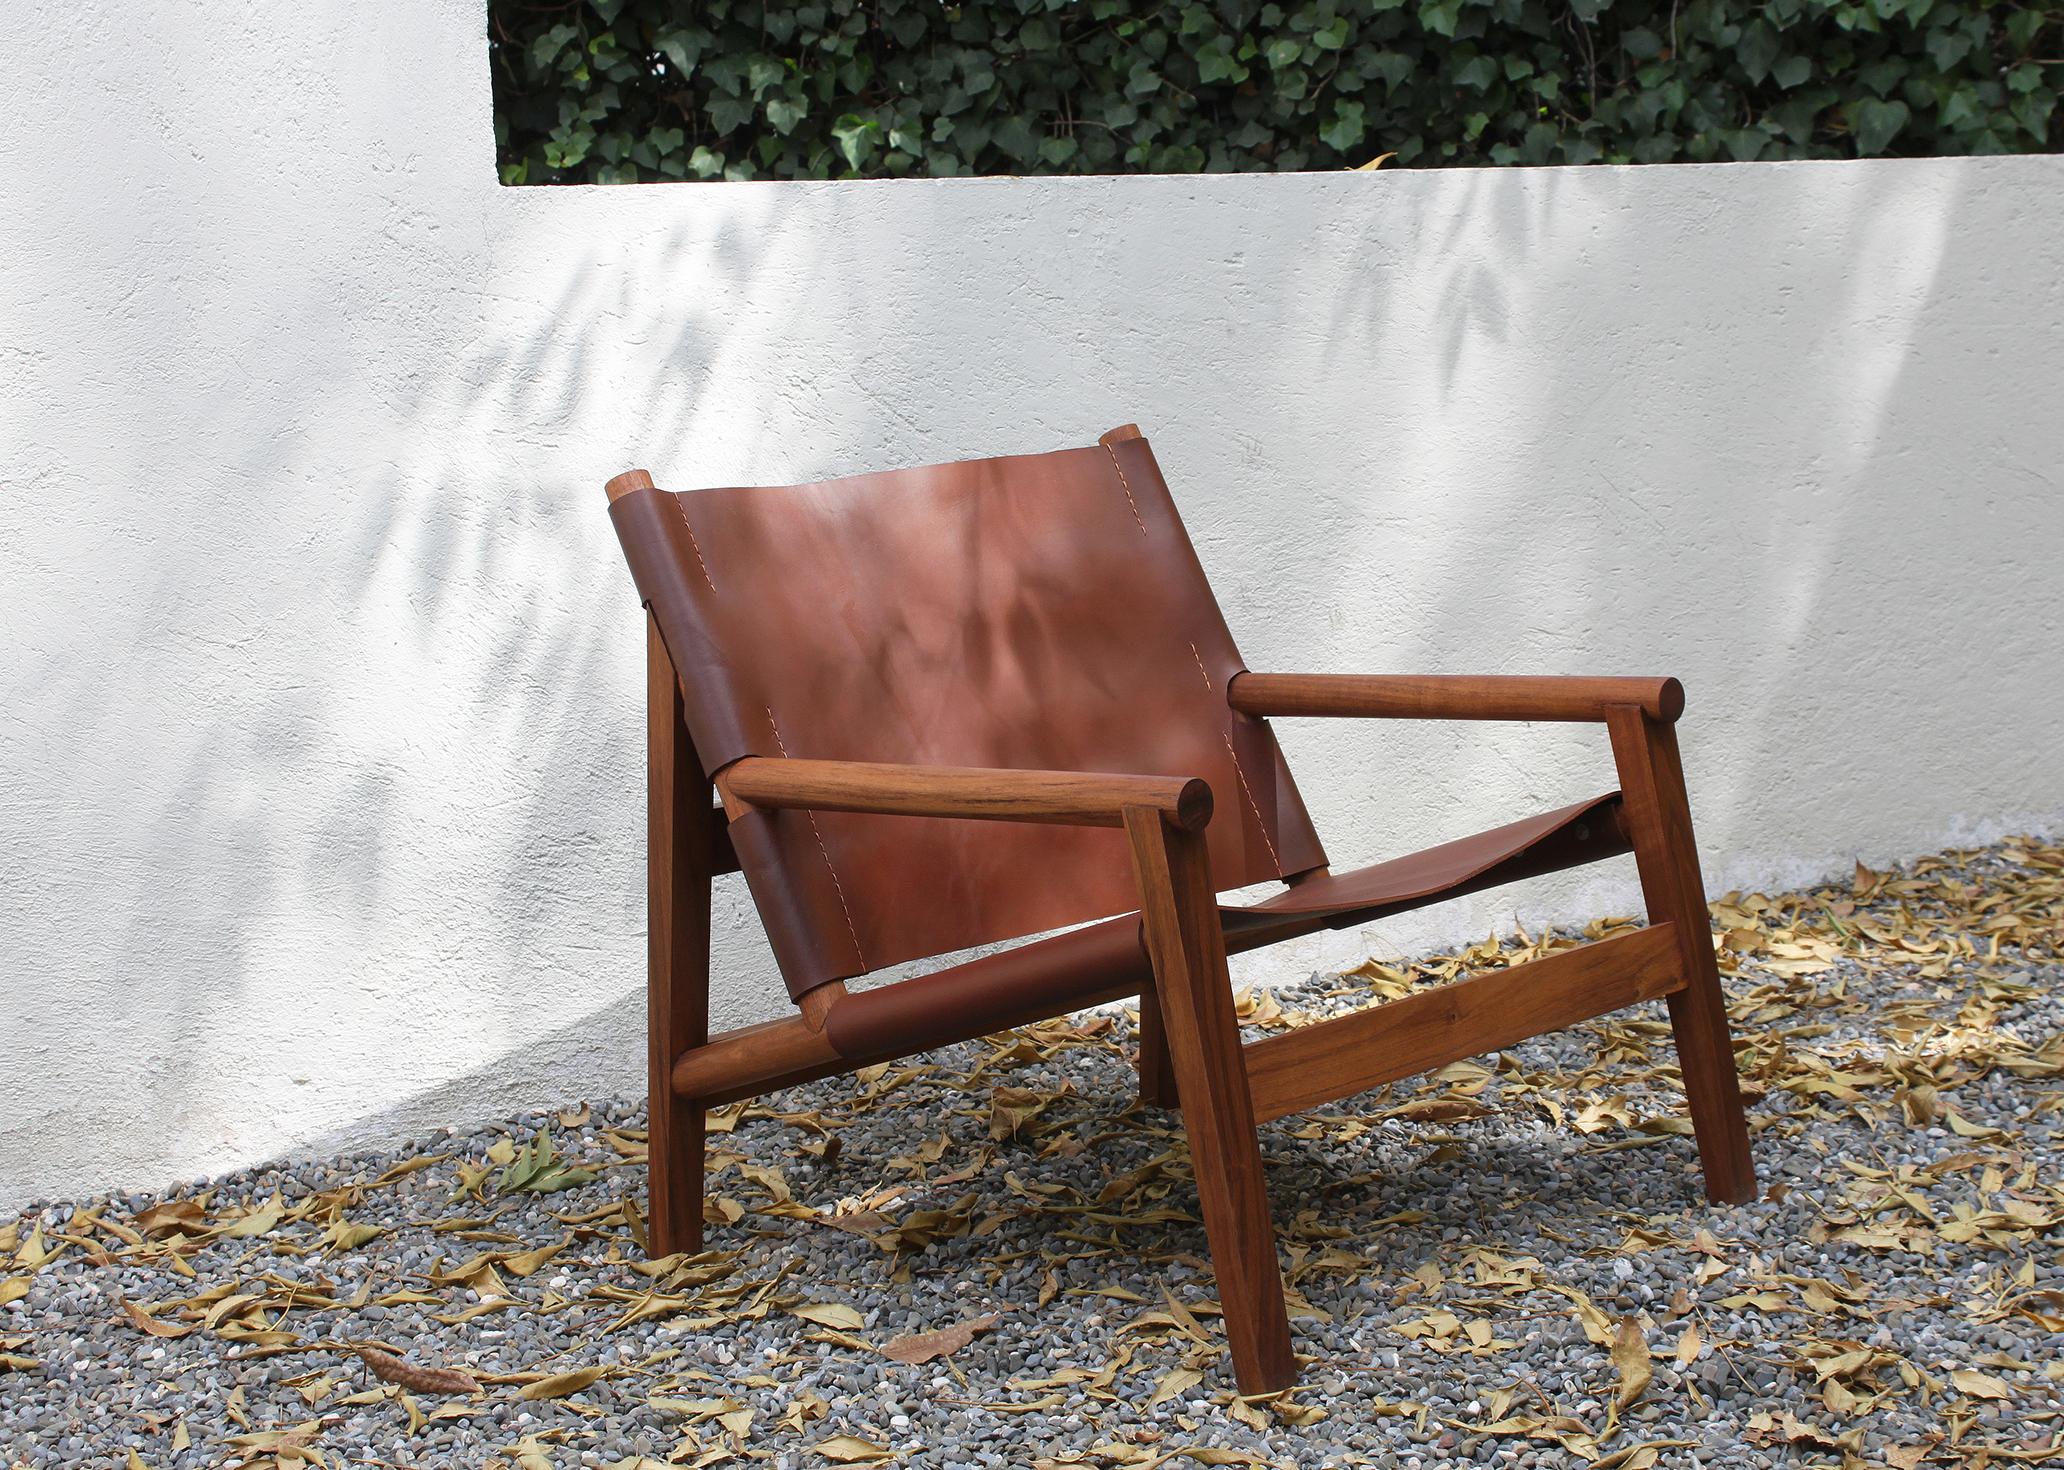 La Colima Chair, Maria Beckmann, Represented by Tuleste Factory For Sale 8